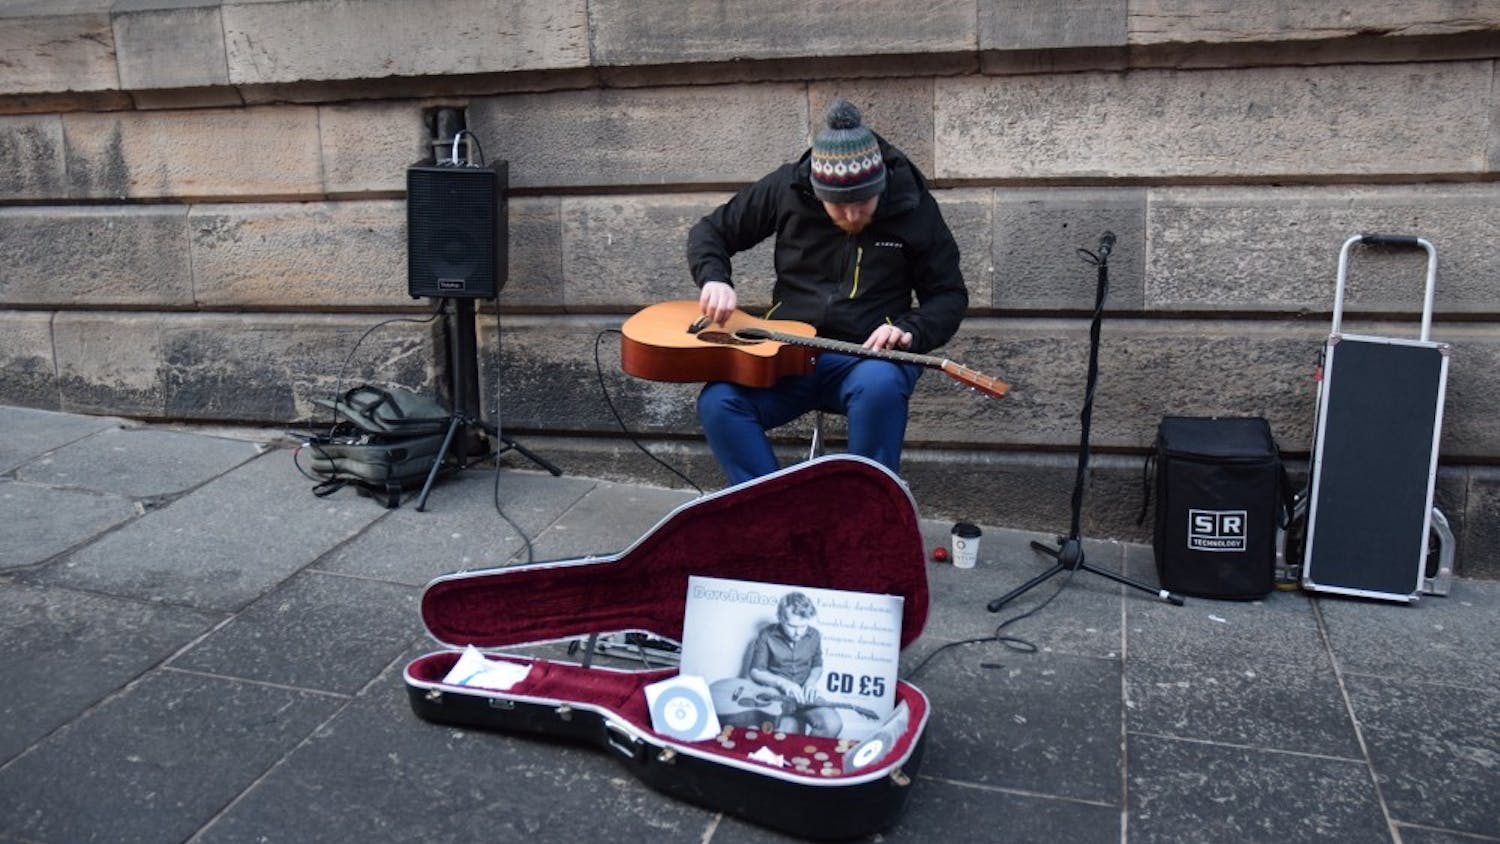 A man plays the guitar on his lap while sitting on the streets of Scotland. He was just one street musician music columnist Hannah Reed stumbled across while in Scotland.